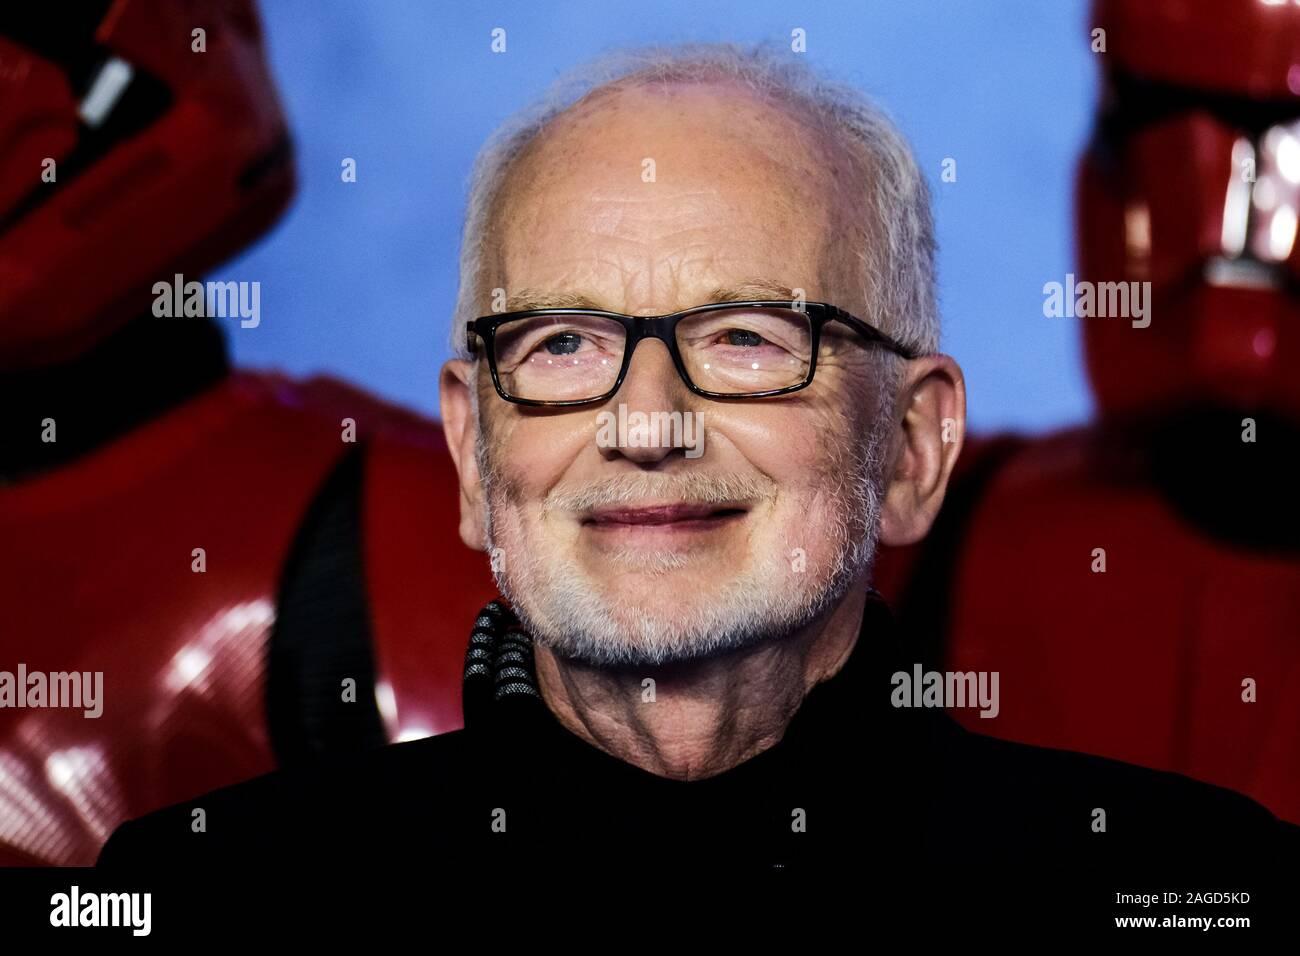 Cineworld Leicester Square, London, UK. 18 December 2019.  Ian Mcdiarmid poses at European Premier of Star Wars: The Rise of Skywalker. . Picture by Julie Edwards./Alamy Live News Stock Photo